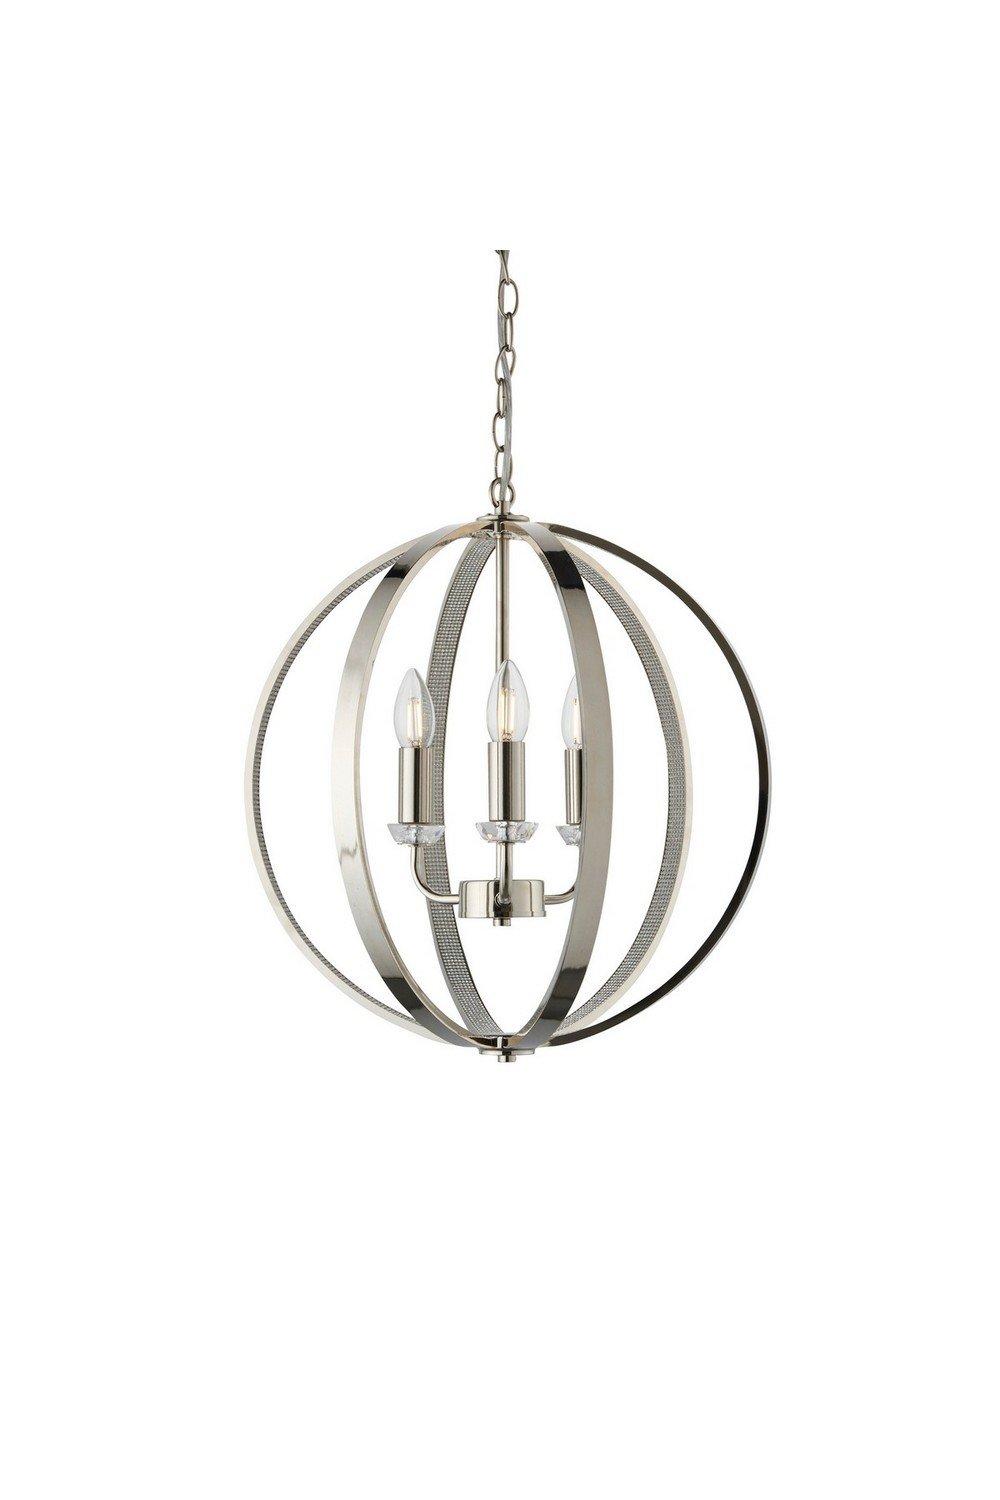 Ritz 3 Light Wire Ceiling Pendant Bright Nickel & Clear Faceted Acrylic E14